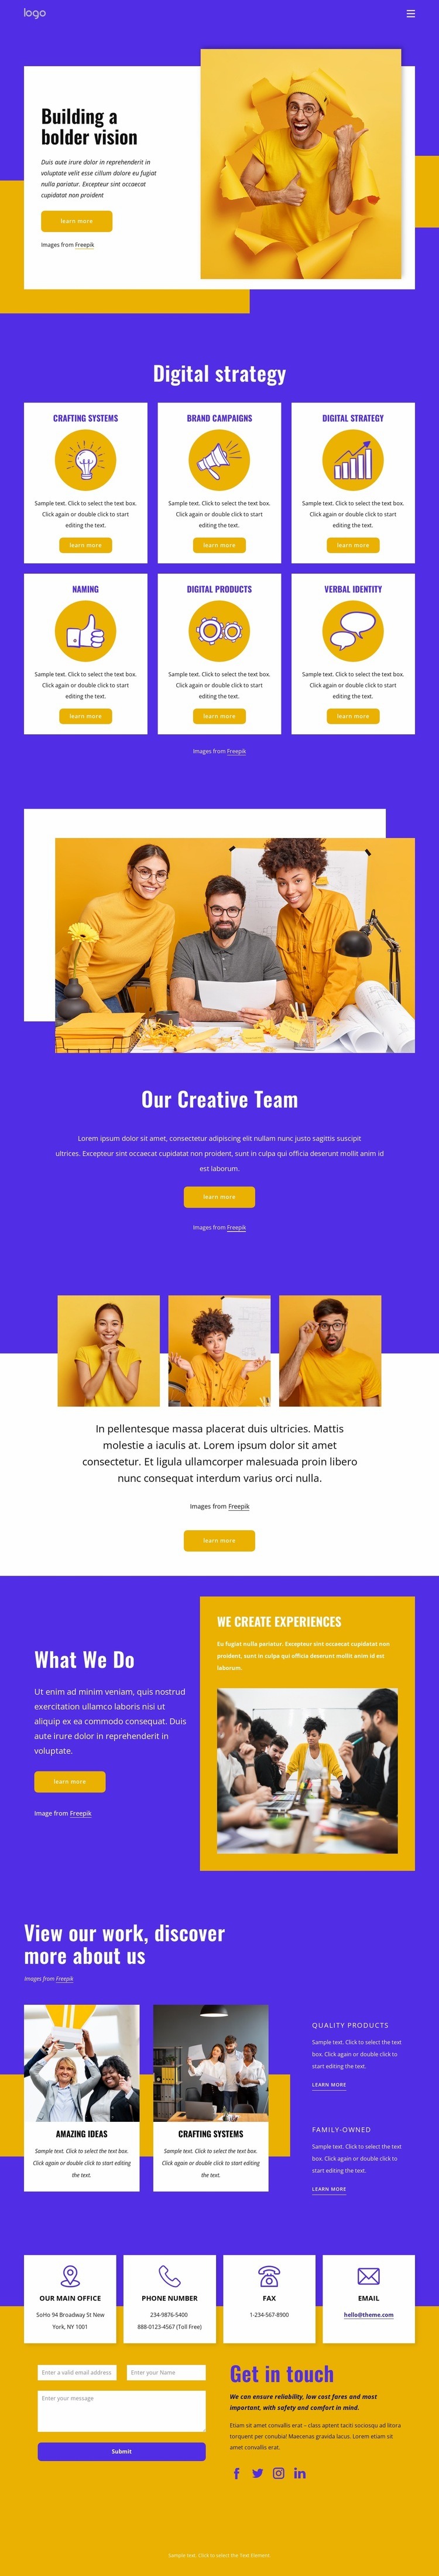 UX design and branding agency Web Page Design